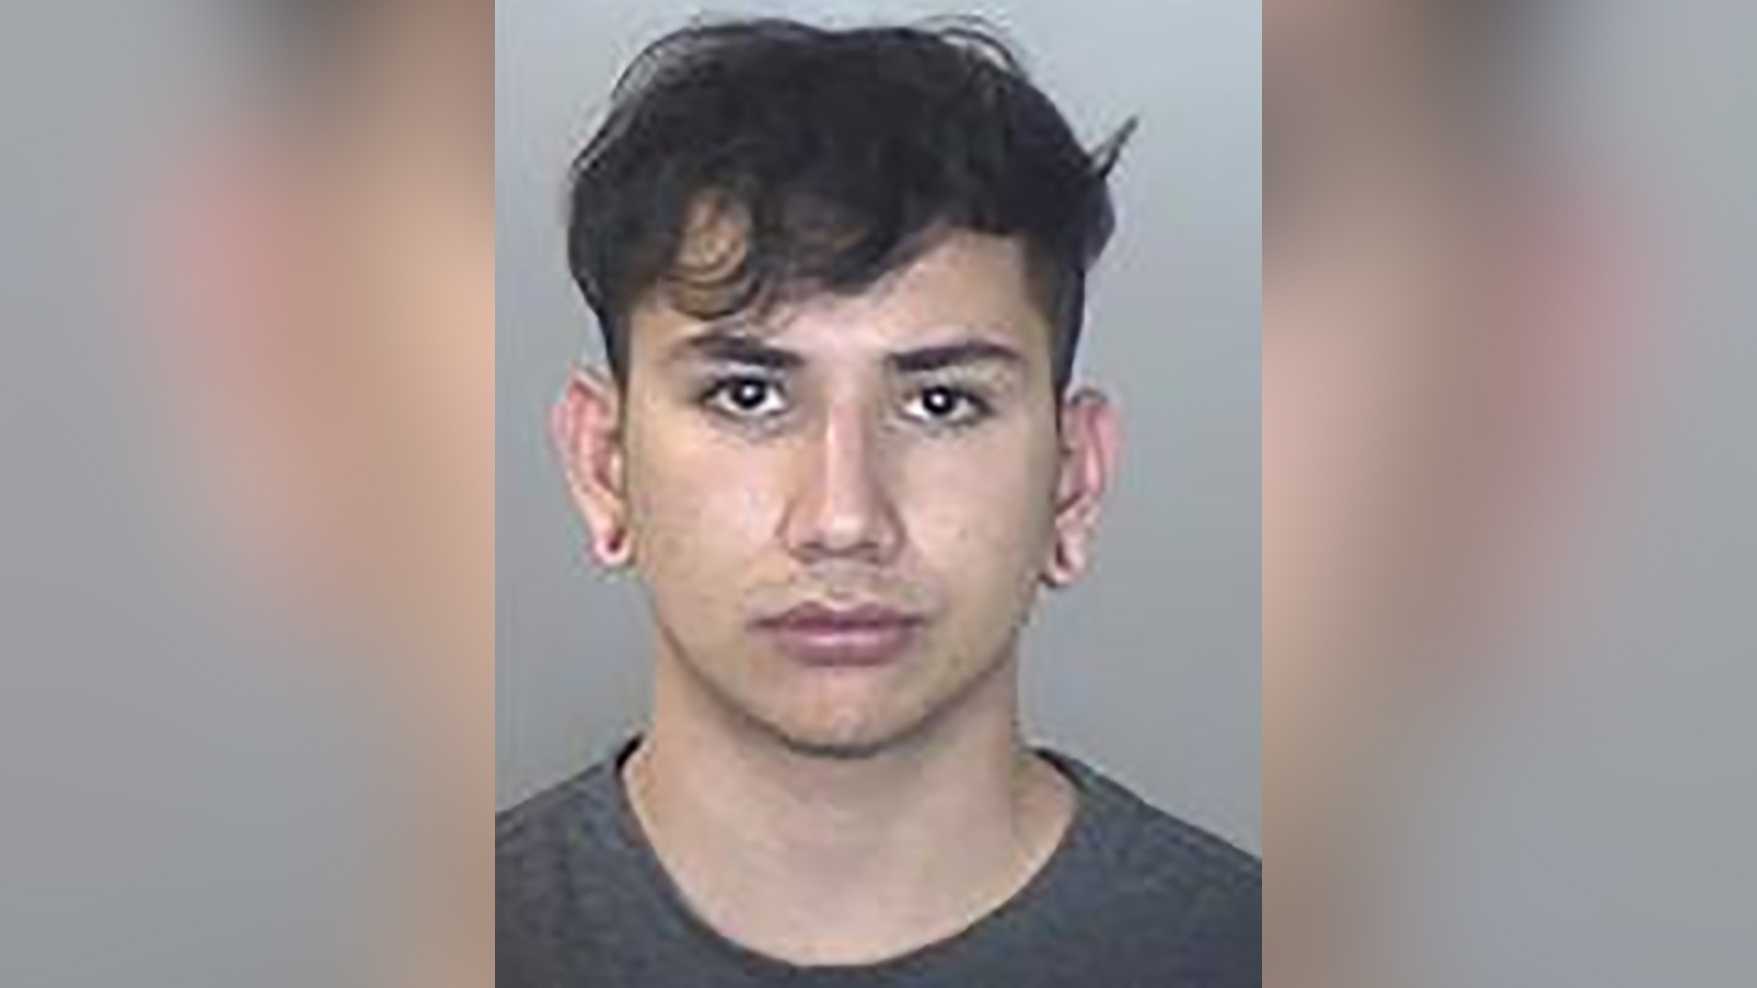 Sacramento man accused of trying to have sex with teen picture